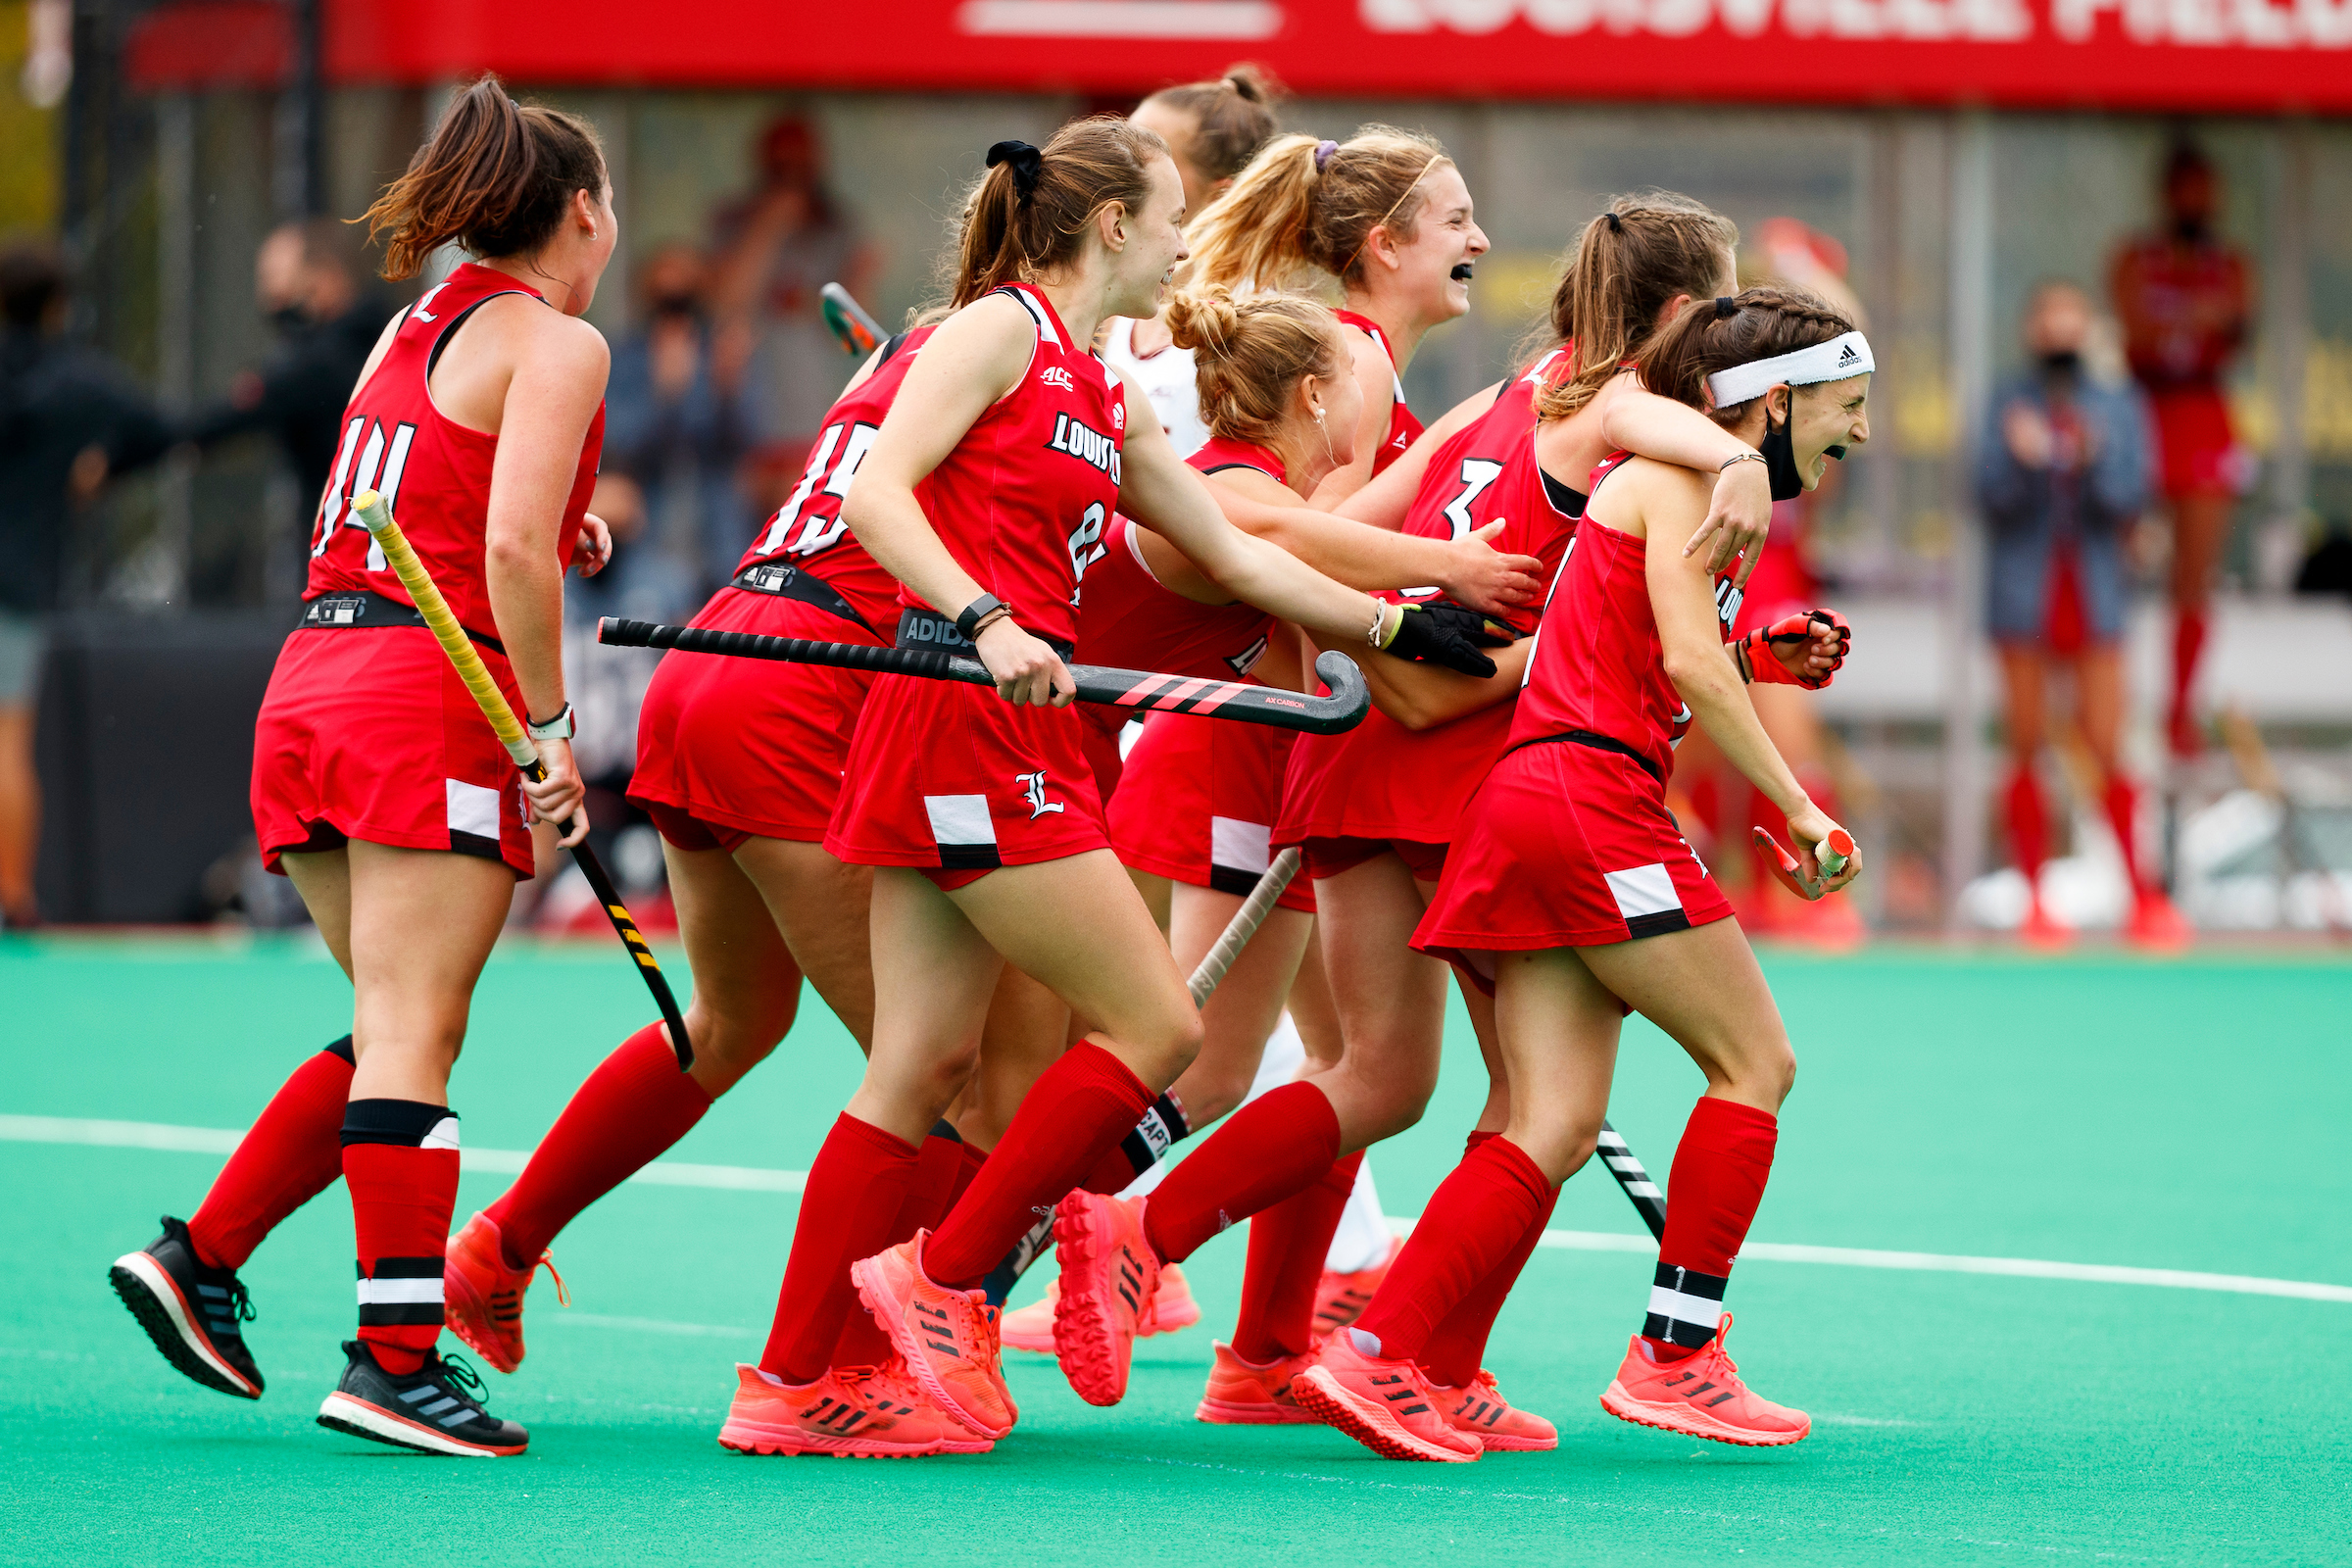 The University of Louisville team celebrates after a goal with a group hug in red uniforms.